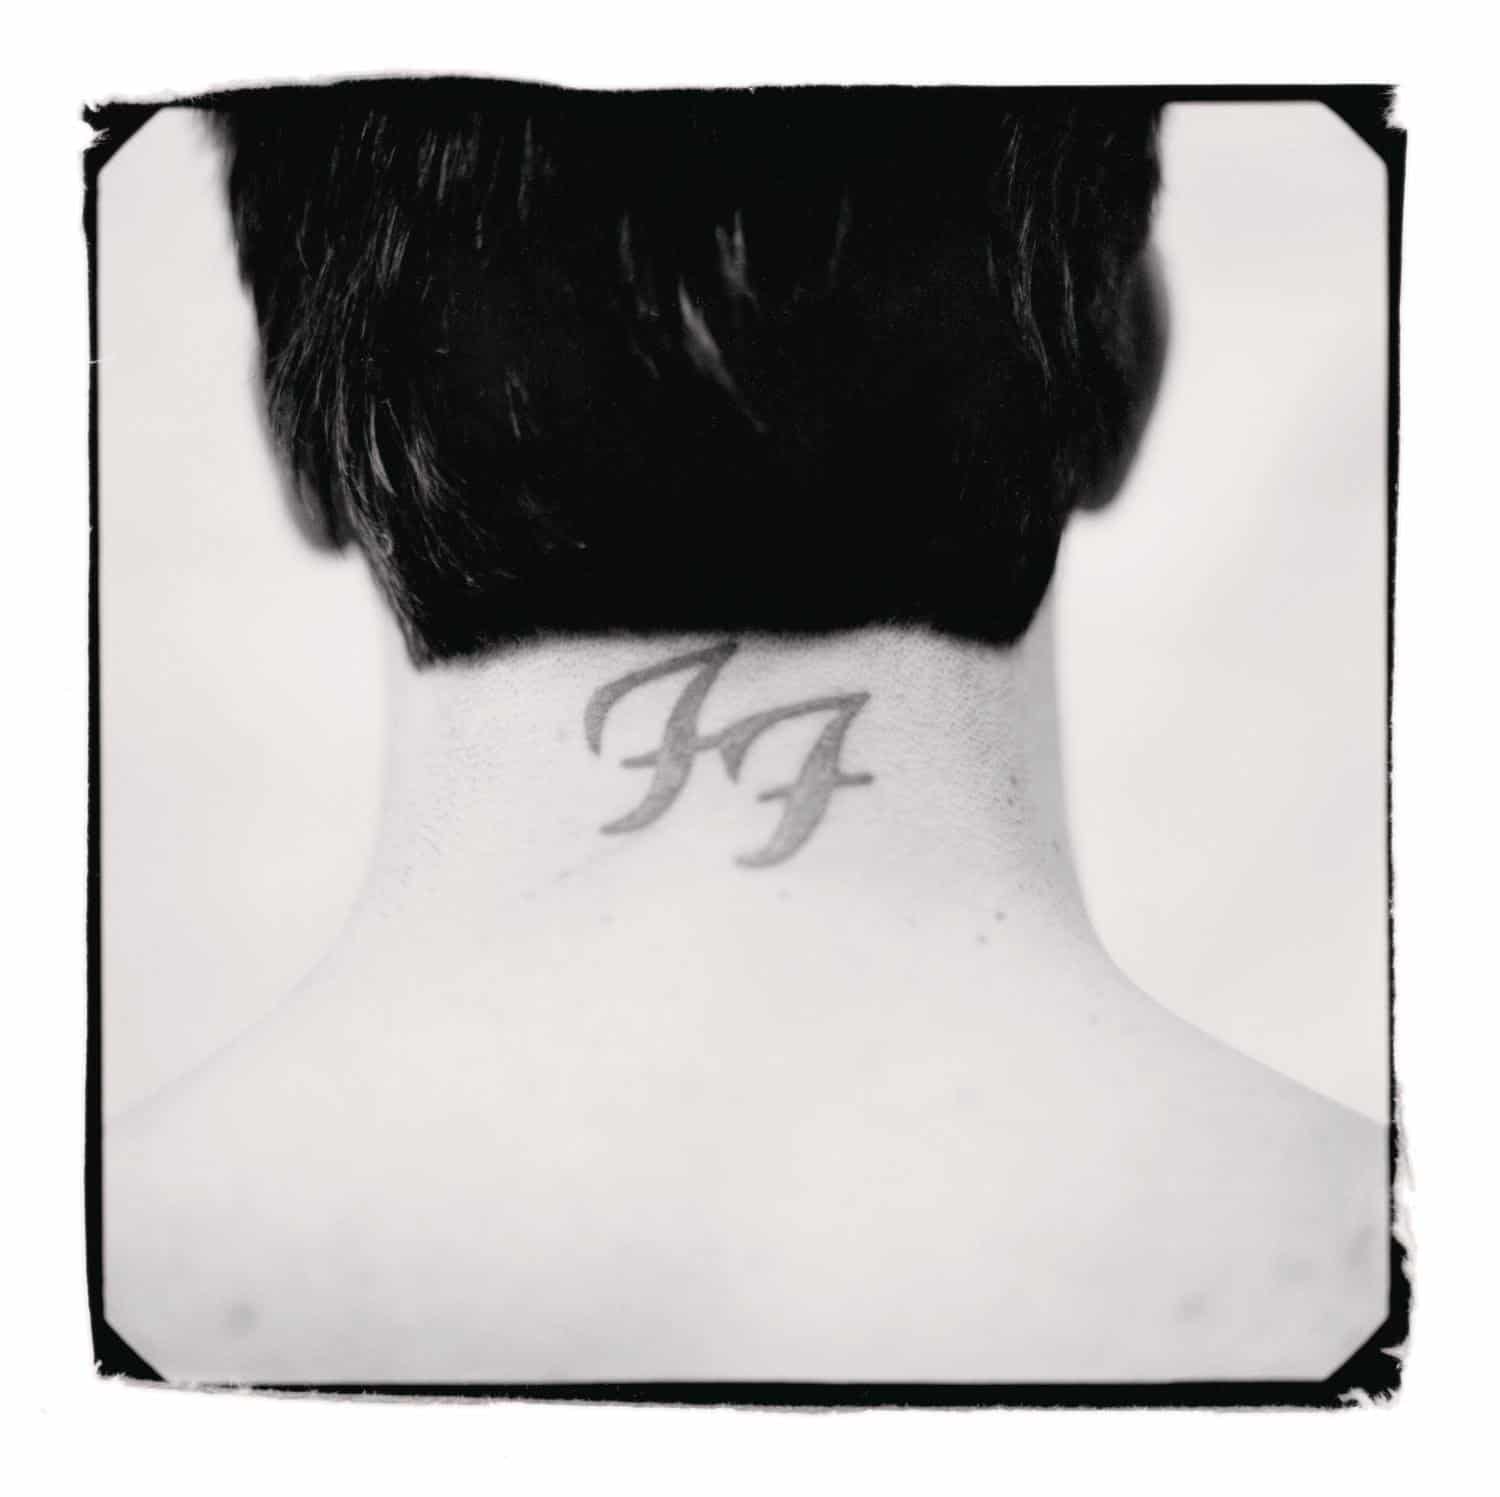 foo-fighters-there-is-nothing-left-to-lose-vinyl-record-album-1